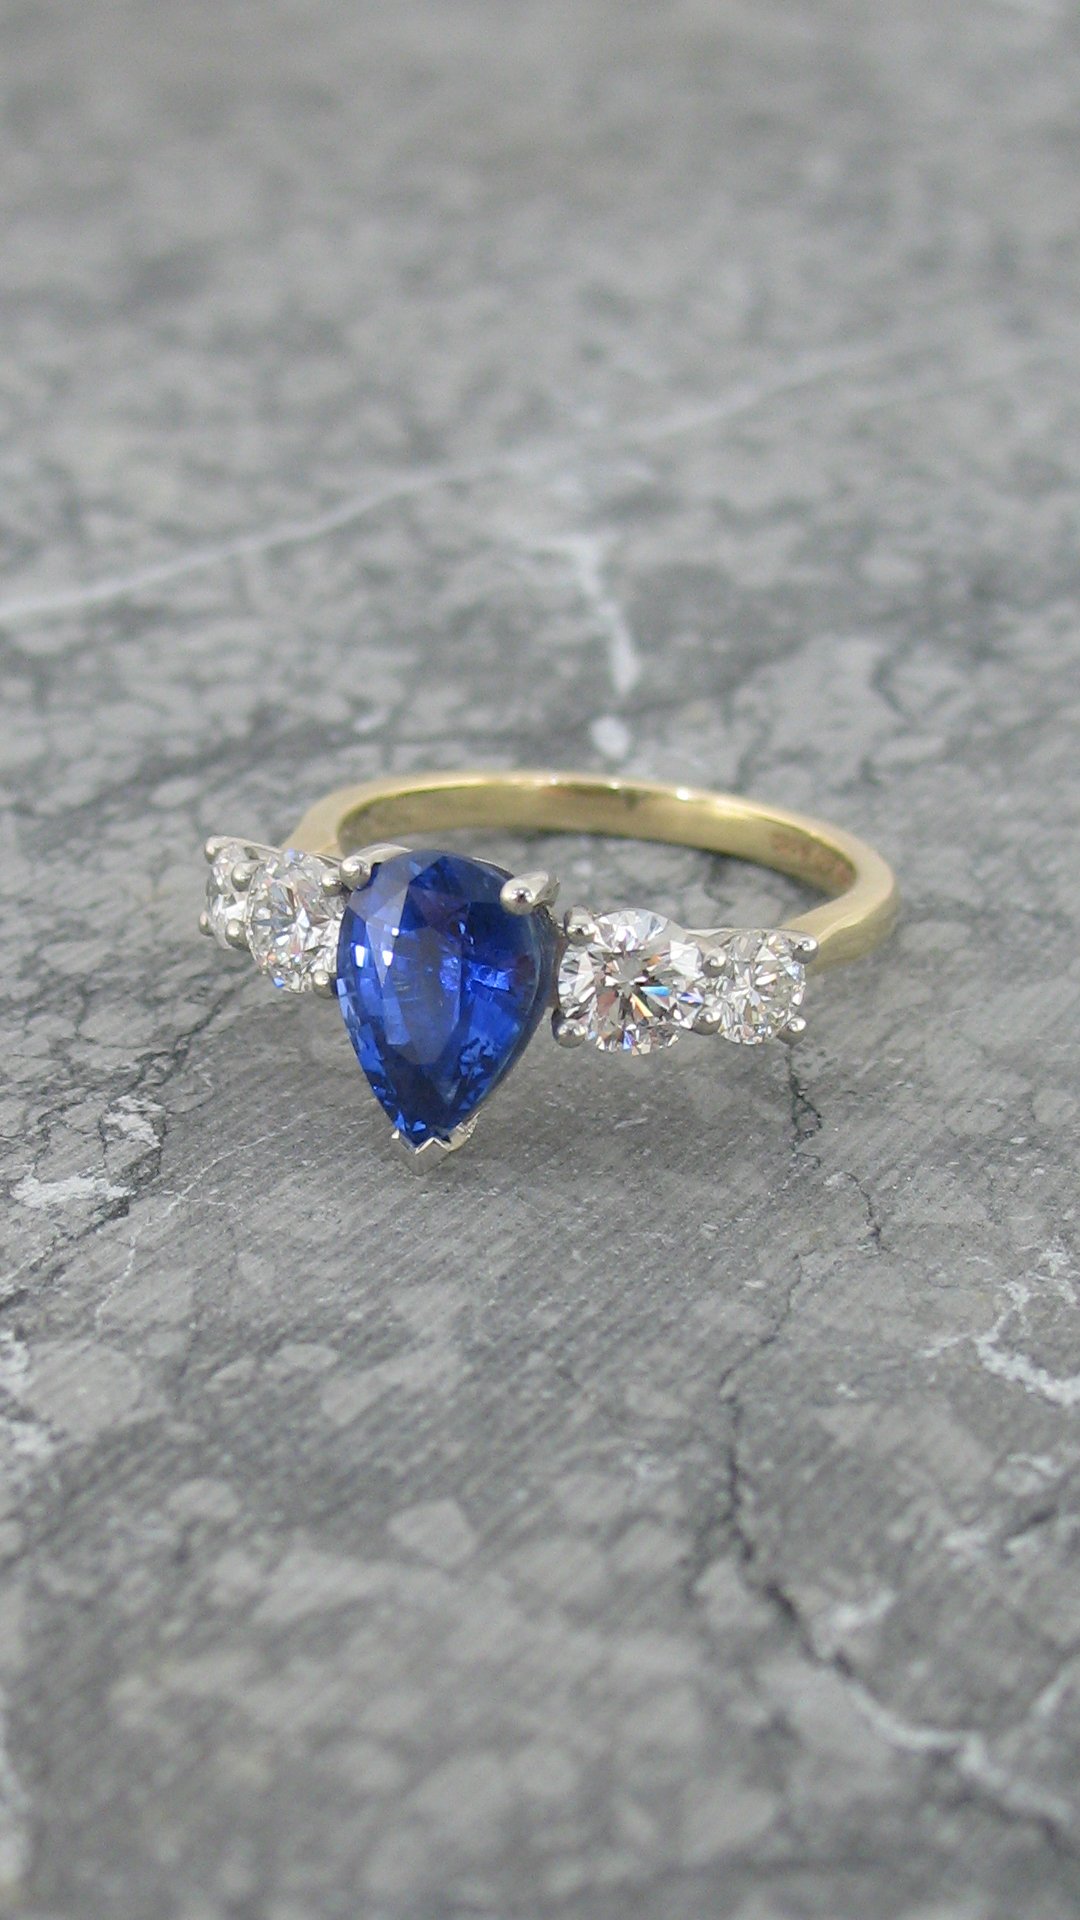 An alluring pear shaped blue sapphire and diamond engagement ring